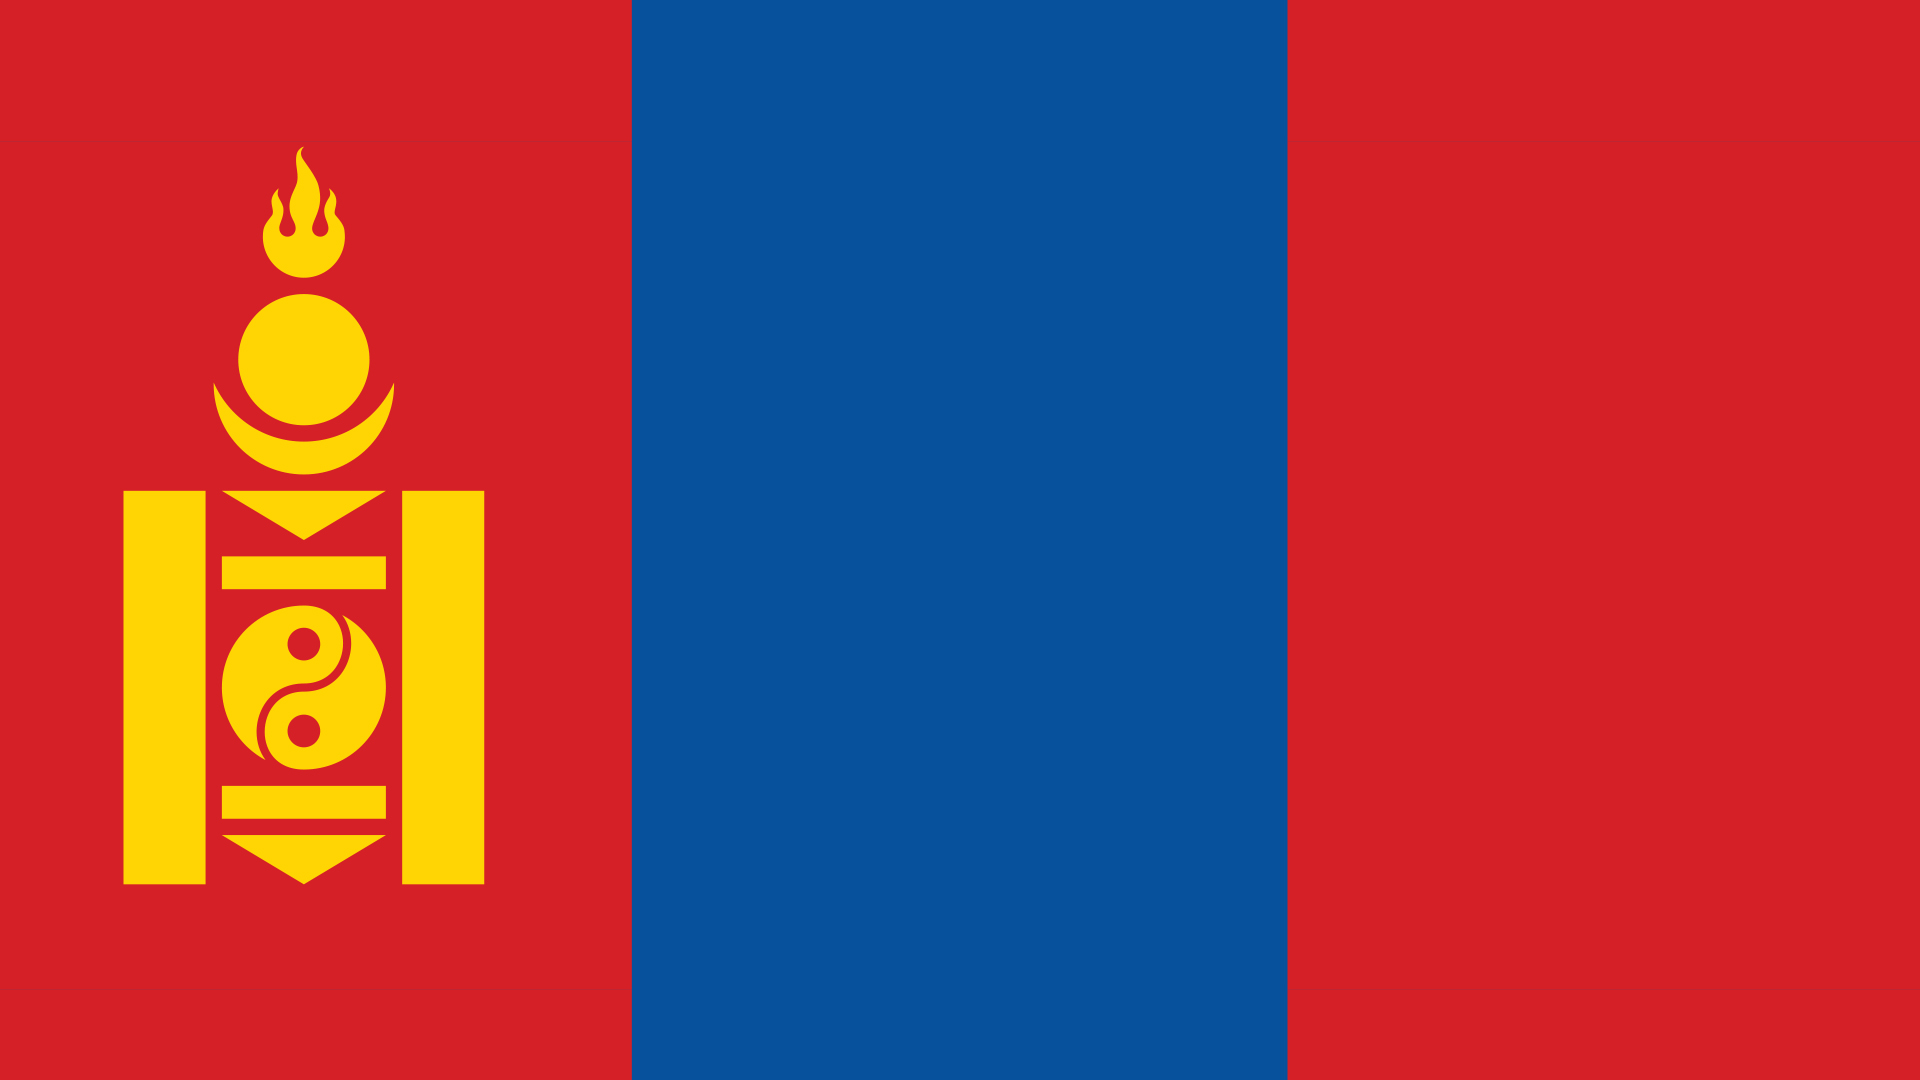 A red, blue and yellow flag 